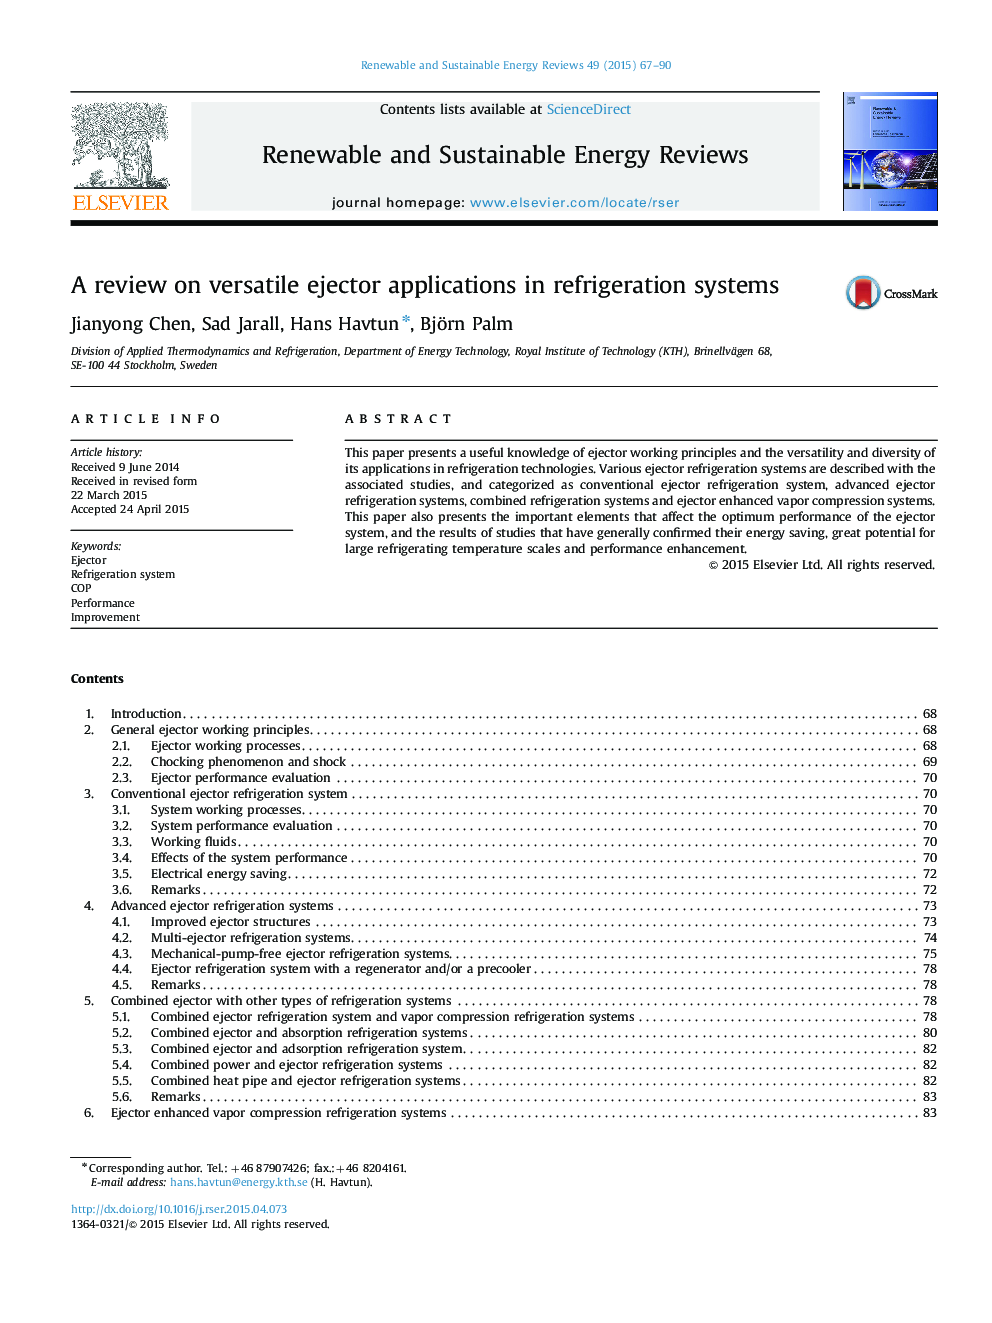 A review on versatile ejector applications in refrigeration systems